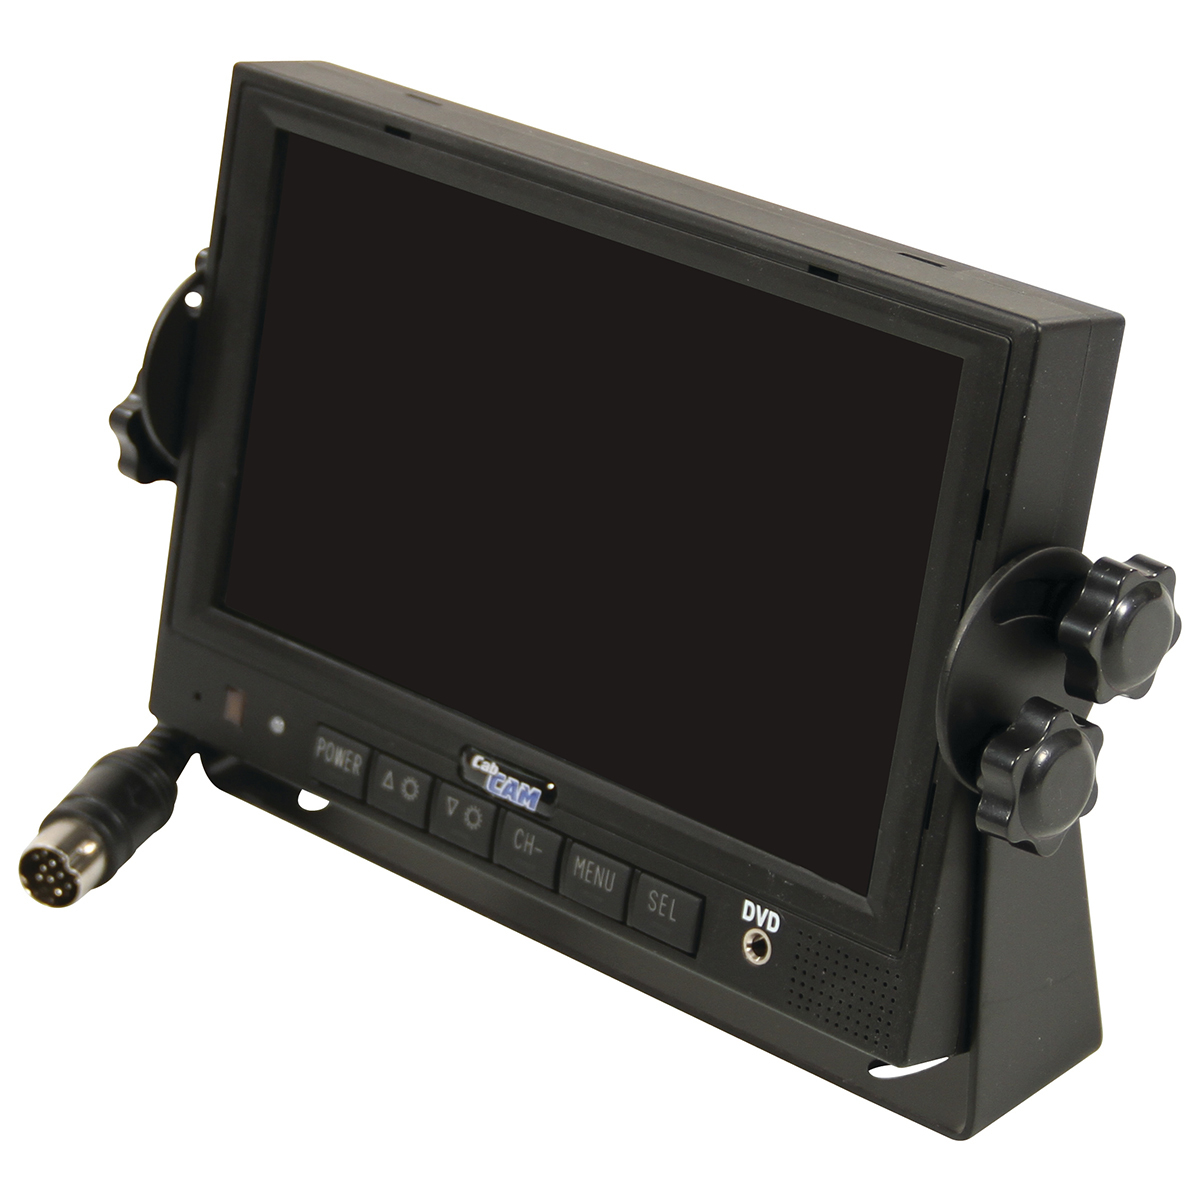 CabCAM Video System Includes 7" Monitor and 1 Camera 